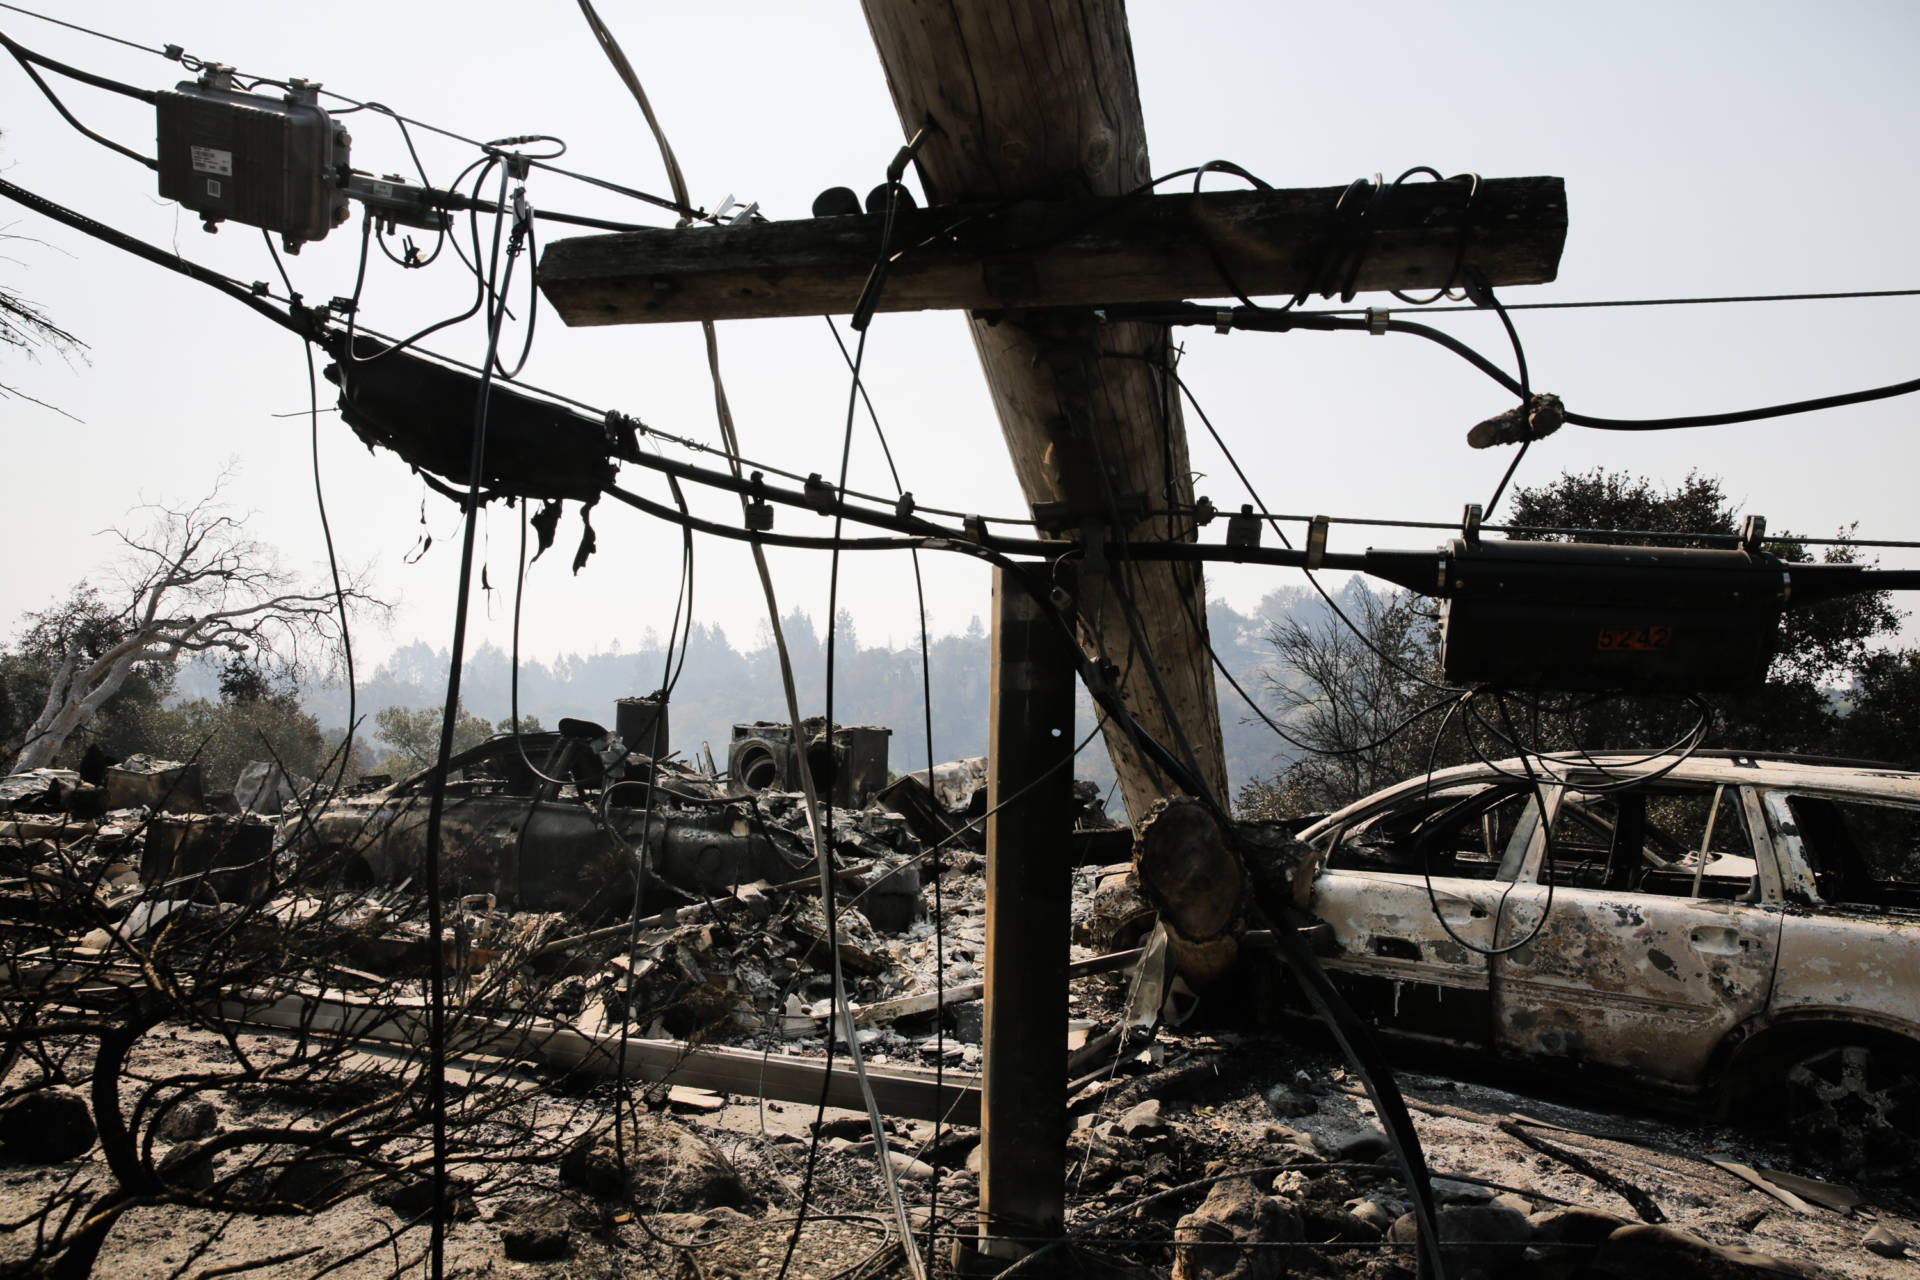  A downed power line and the remains of a home and a car are seen in Santa Rosa's Larkfield-Wikiup neighborhood after last October's Tubbs Fire. Elijah Novelage/Getty Images